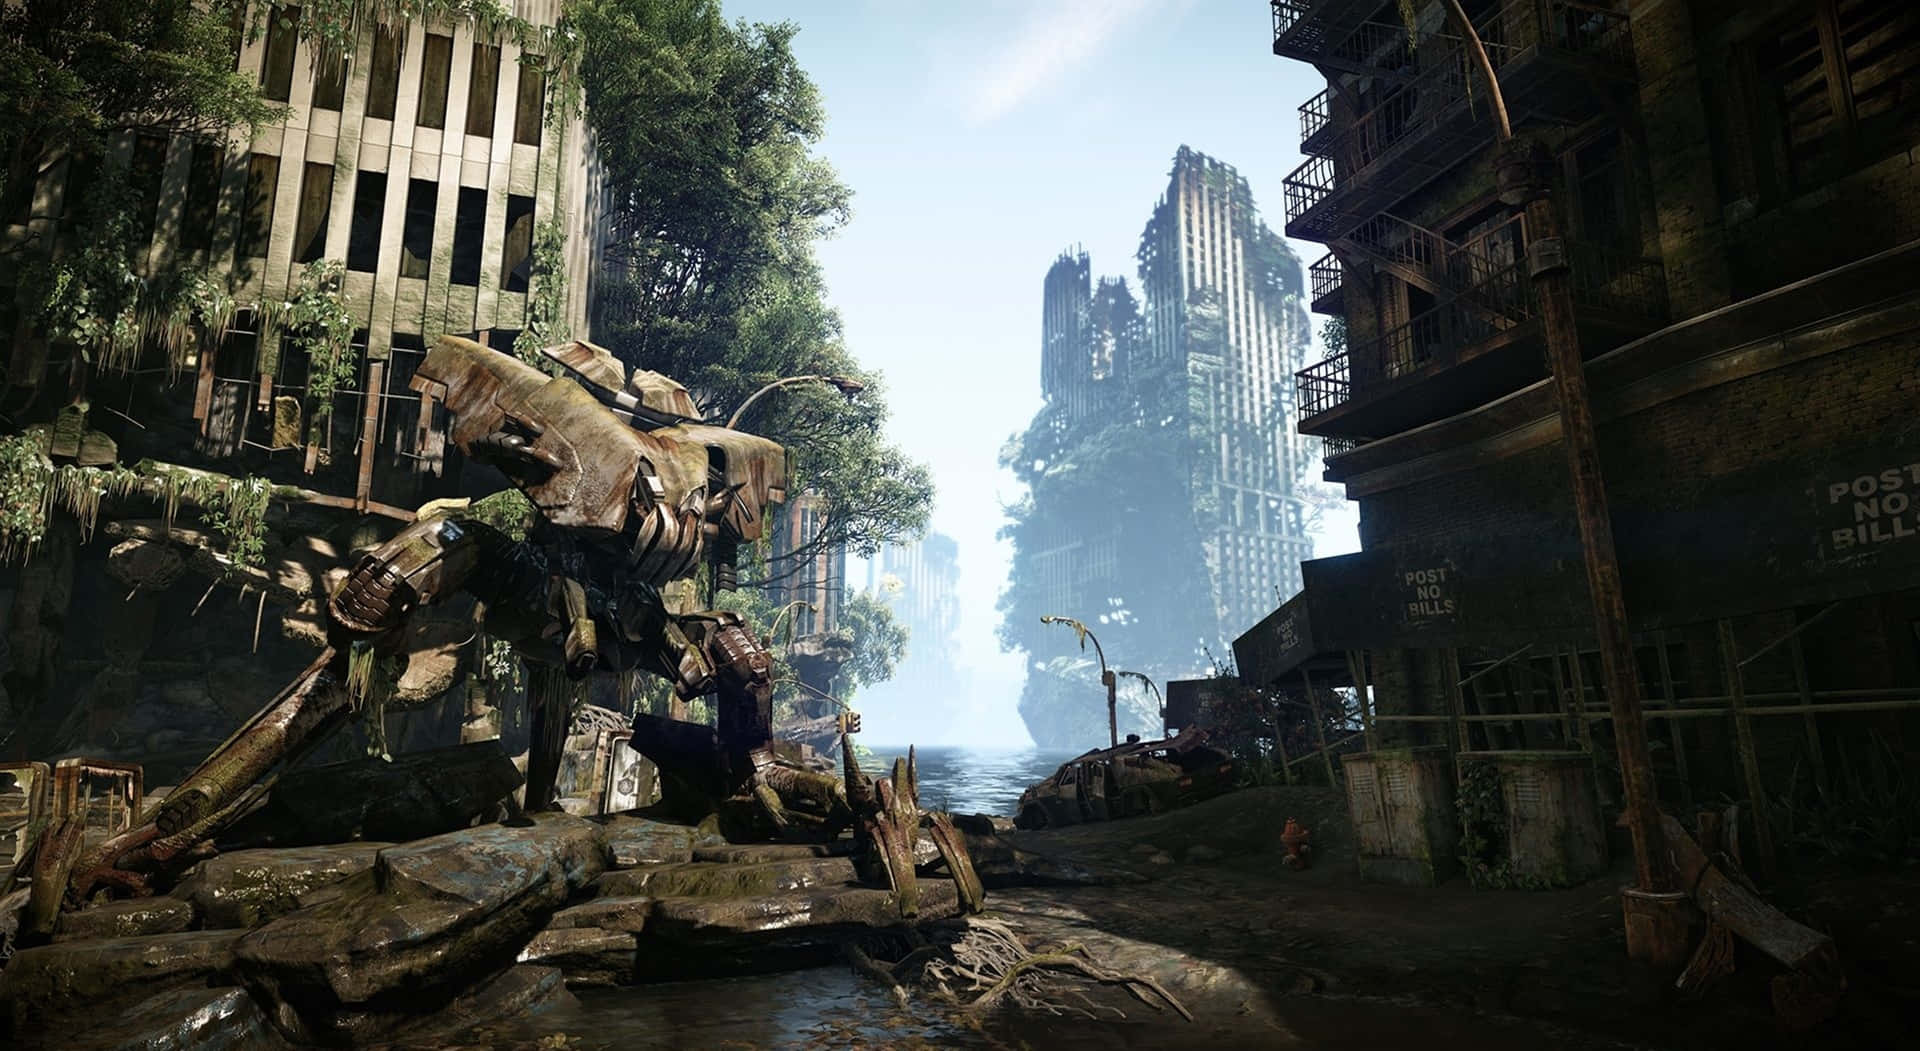 Blast your way through a ruined city in Crysis Wallpaper